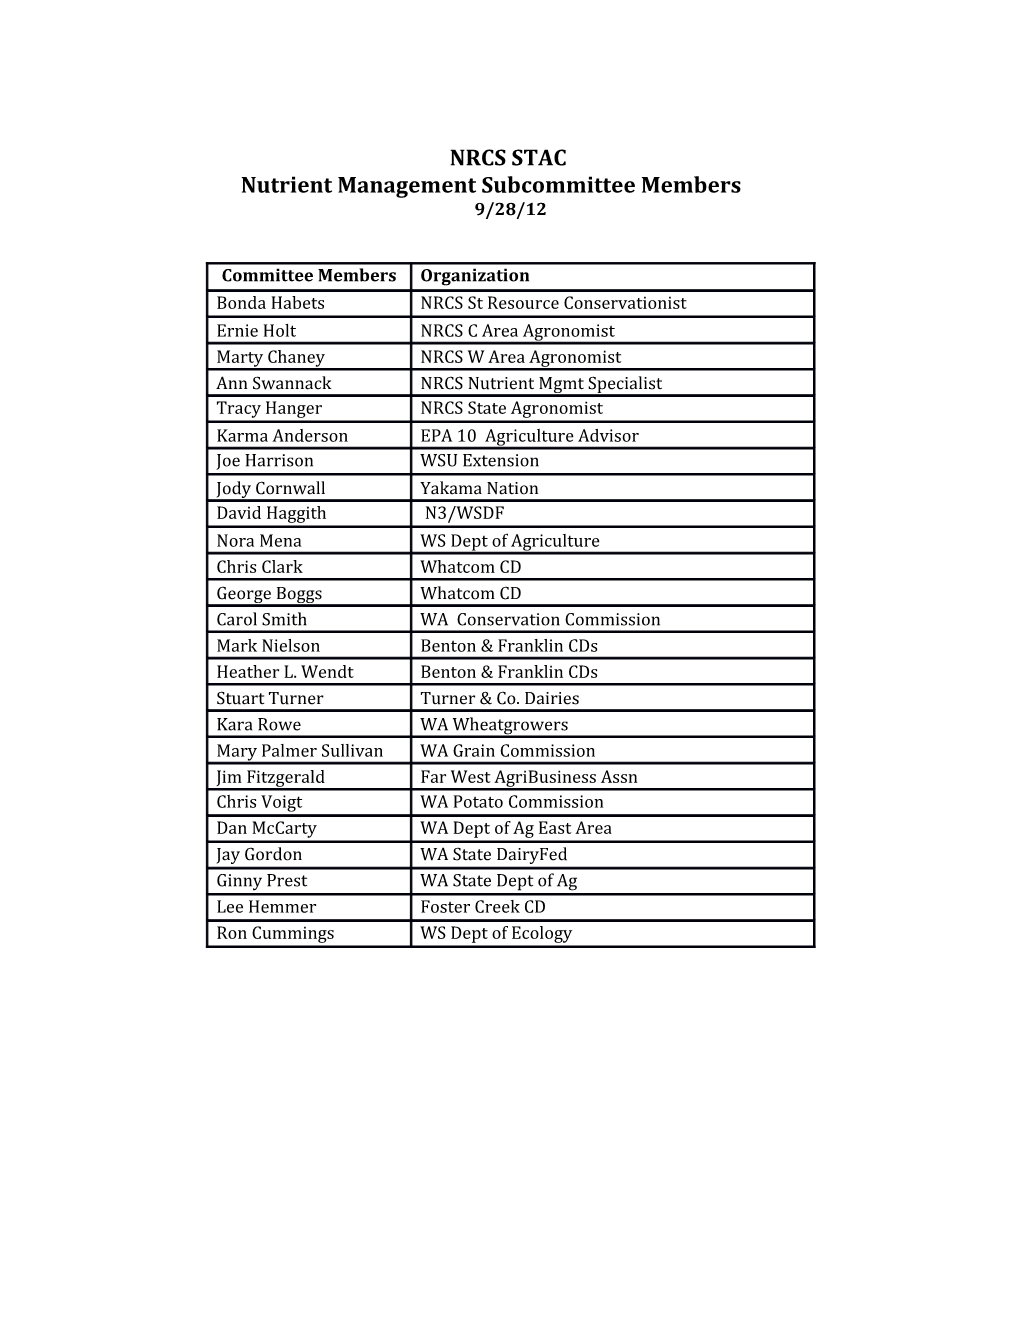 Nutrient Management Subcommittee Members